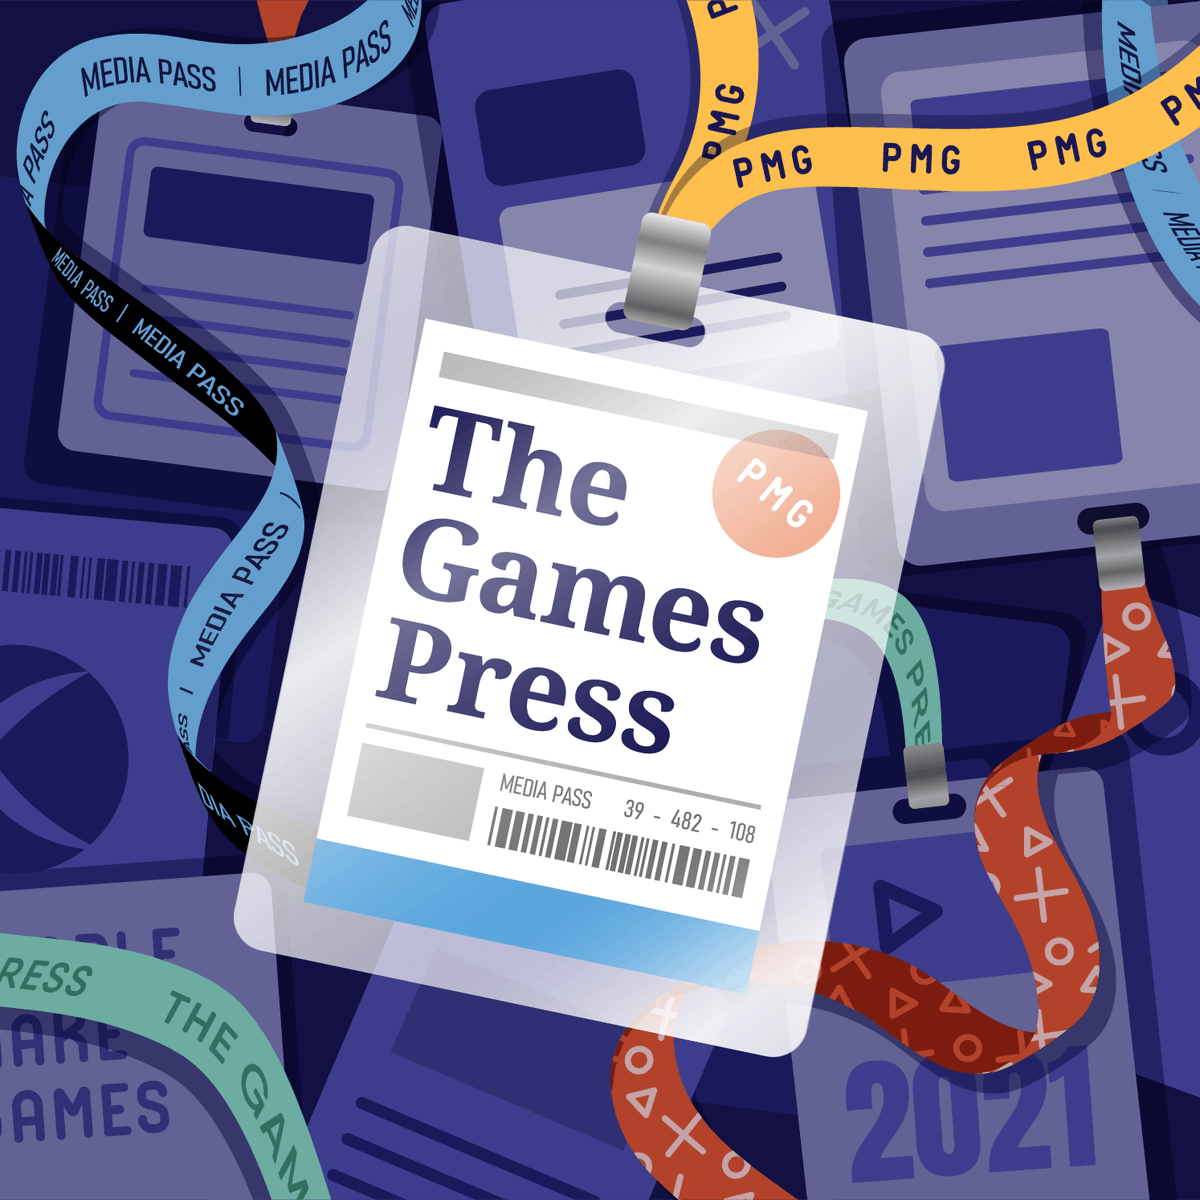 I'm really pleased to reveal that @sweetpotatoes has agreed to guest host the next few episodes of The Games Press while I get used to juggling PMG work and being a dad!